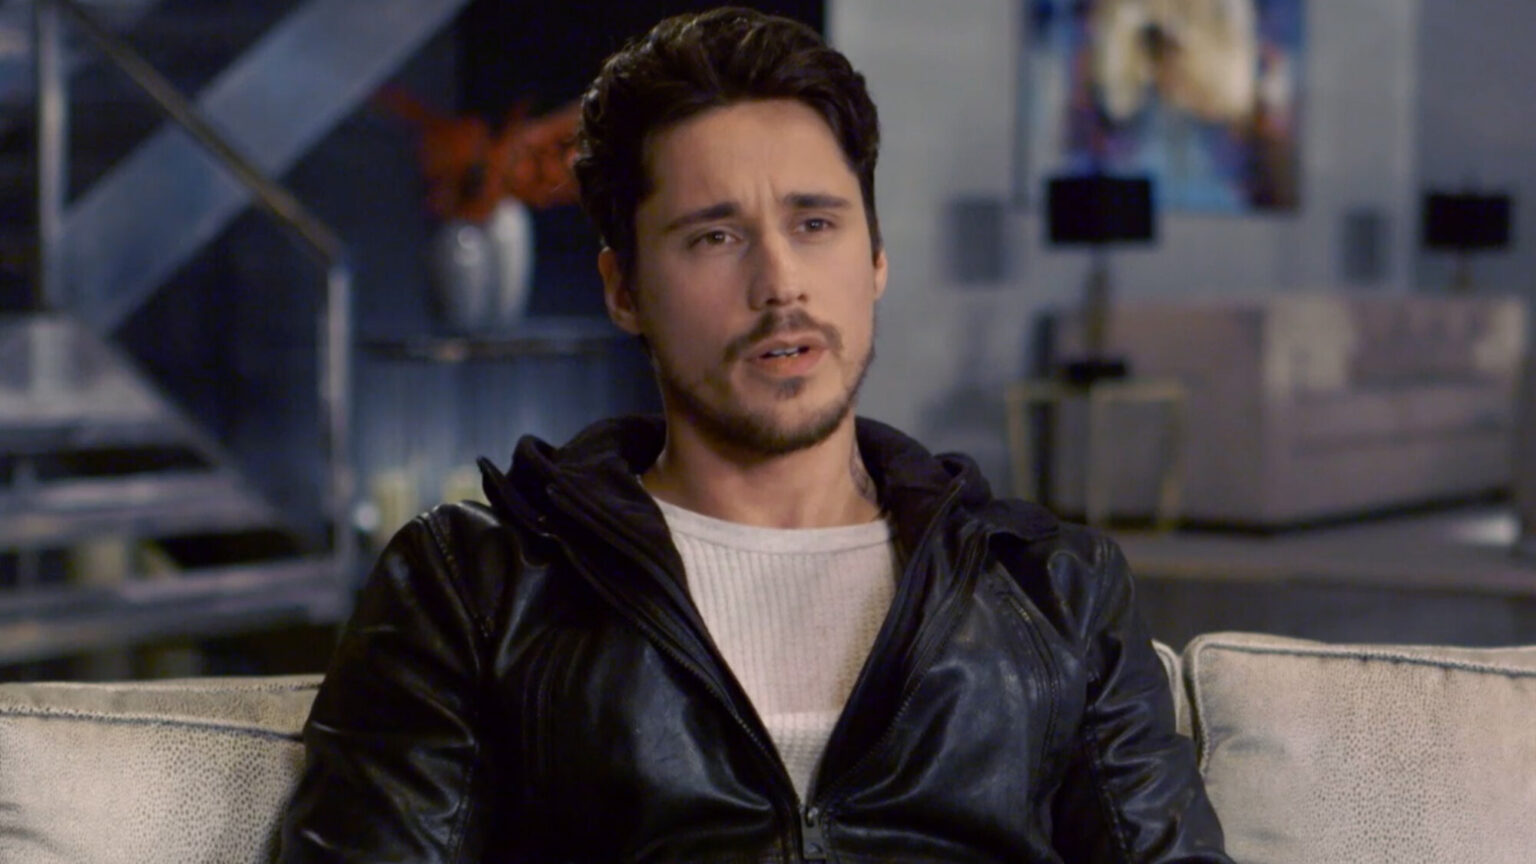 Peter Gadiot is undeniably handsome. We put together some of our his hottest moments in 'Queen of the South' just for the fun of it.